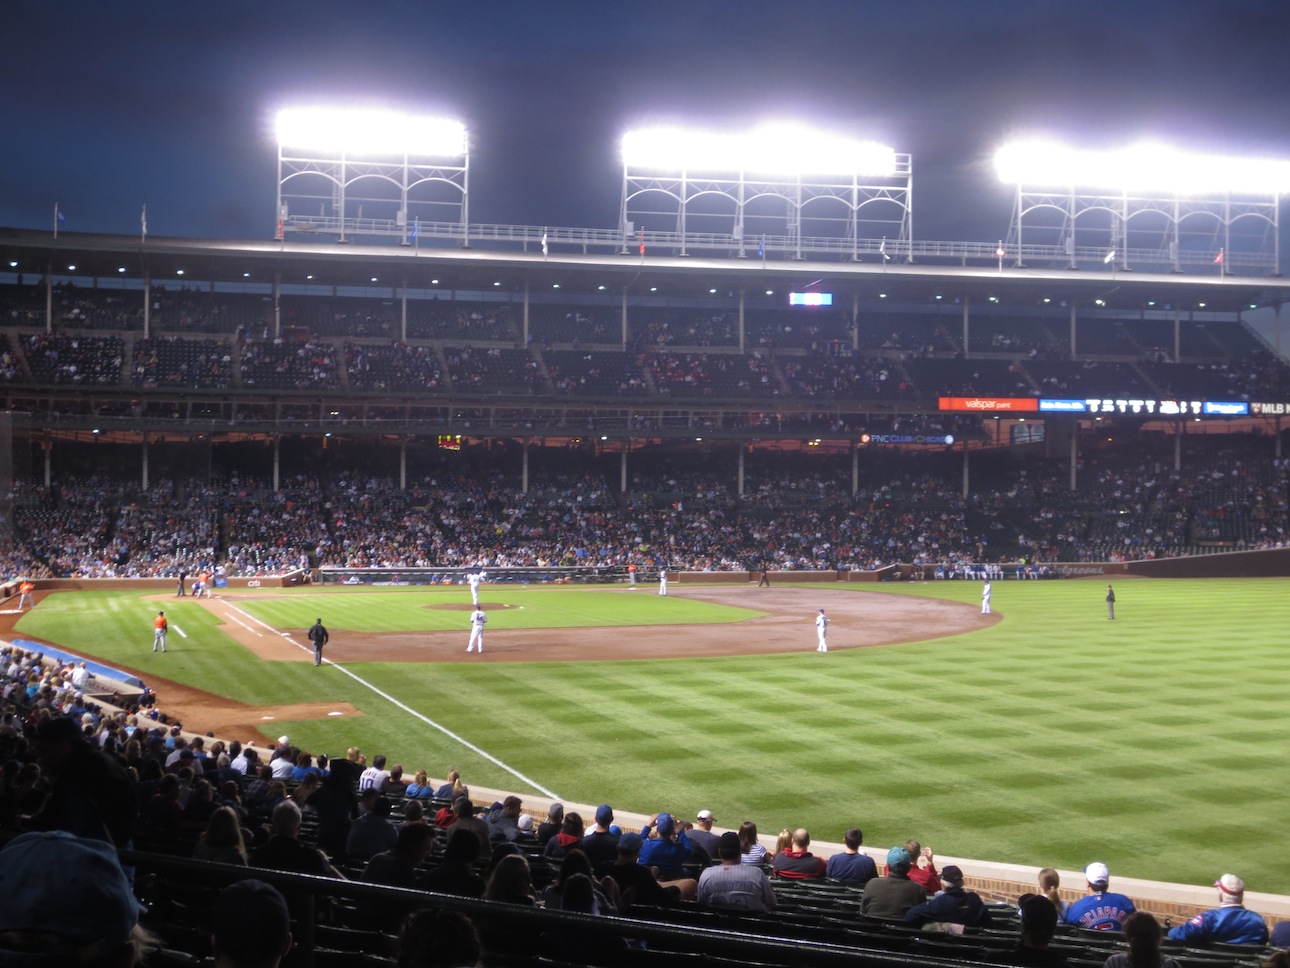 A Cubs game at Wrigley Field.